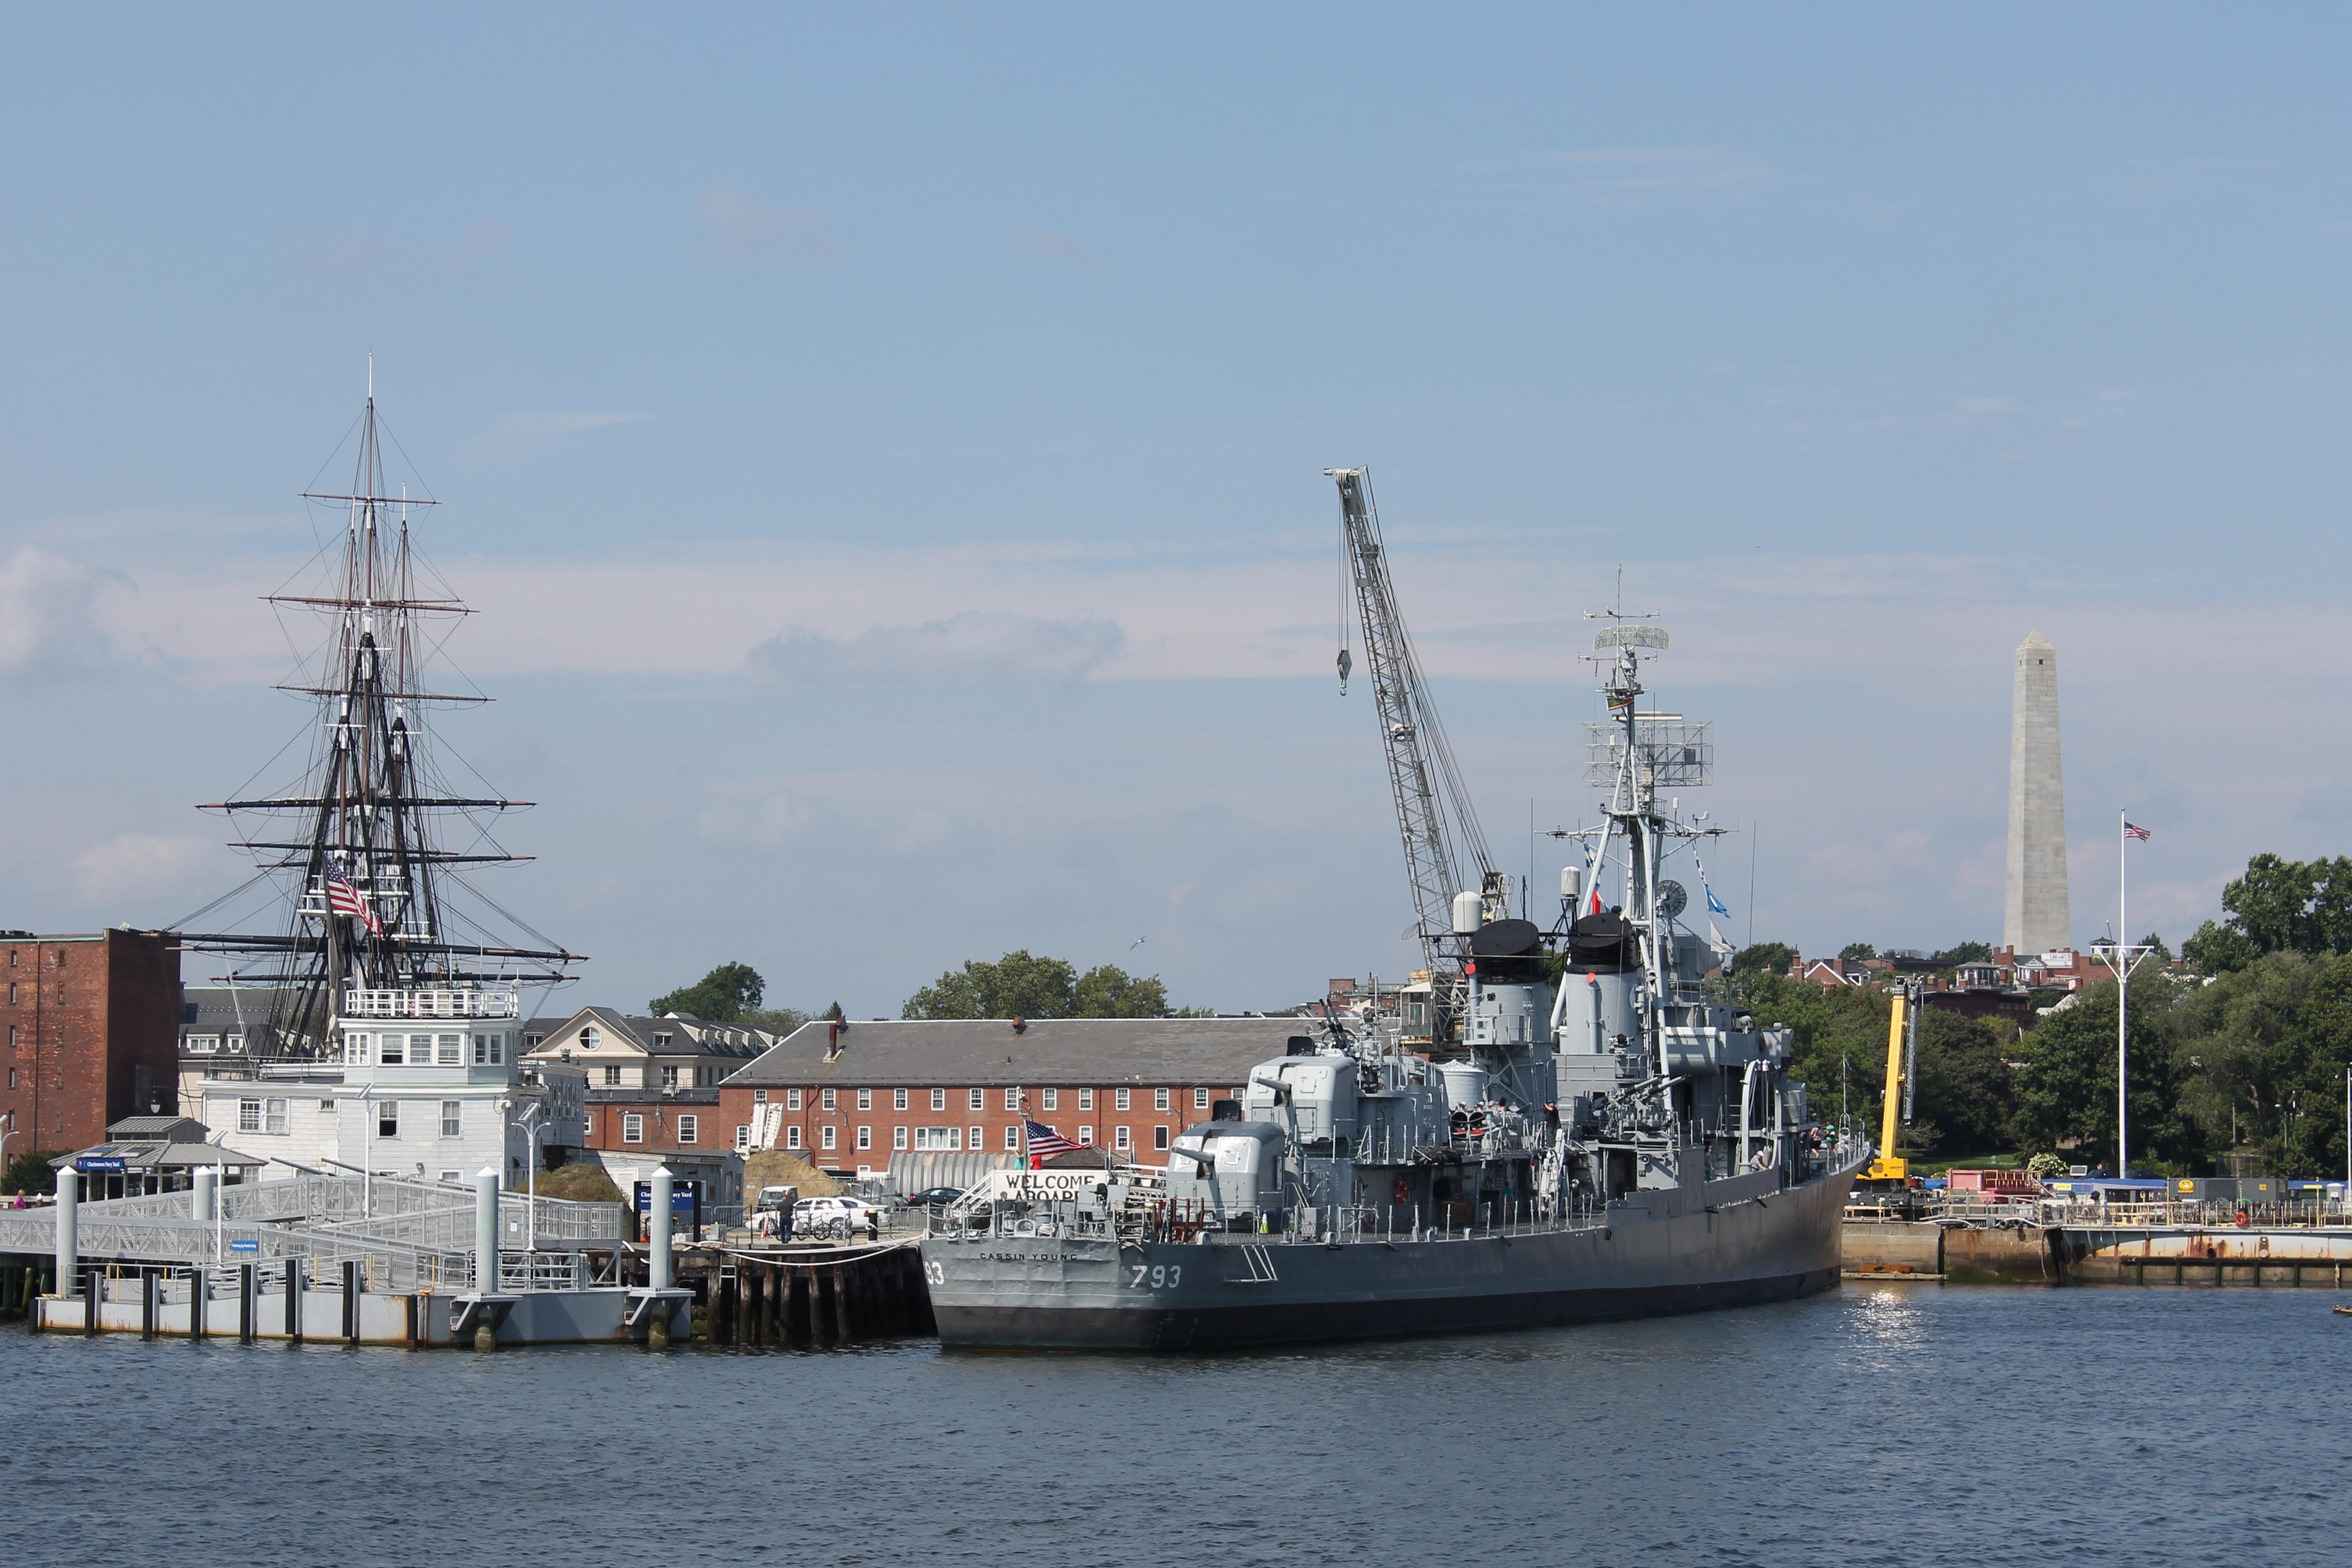 View of the Navy Yard from the harbor showing the USS Constution, USS Cassin Young and Bunker Hill